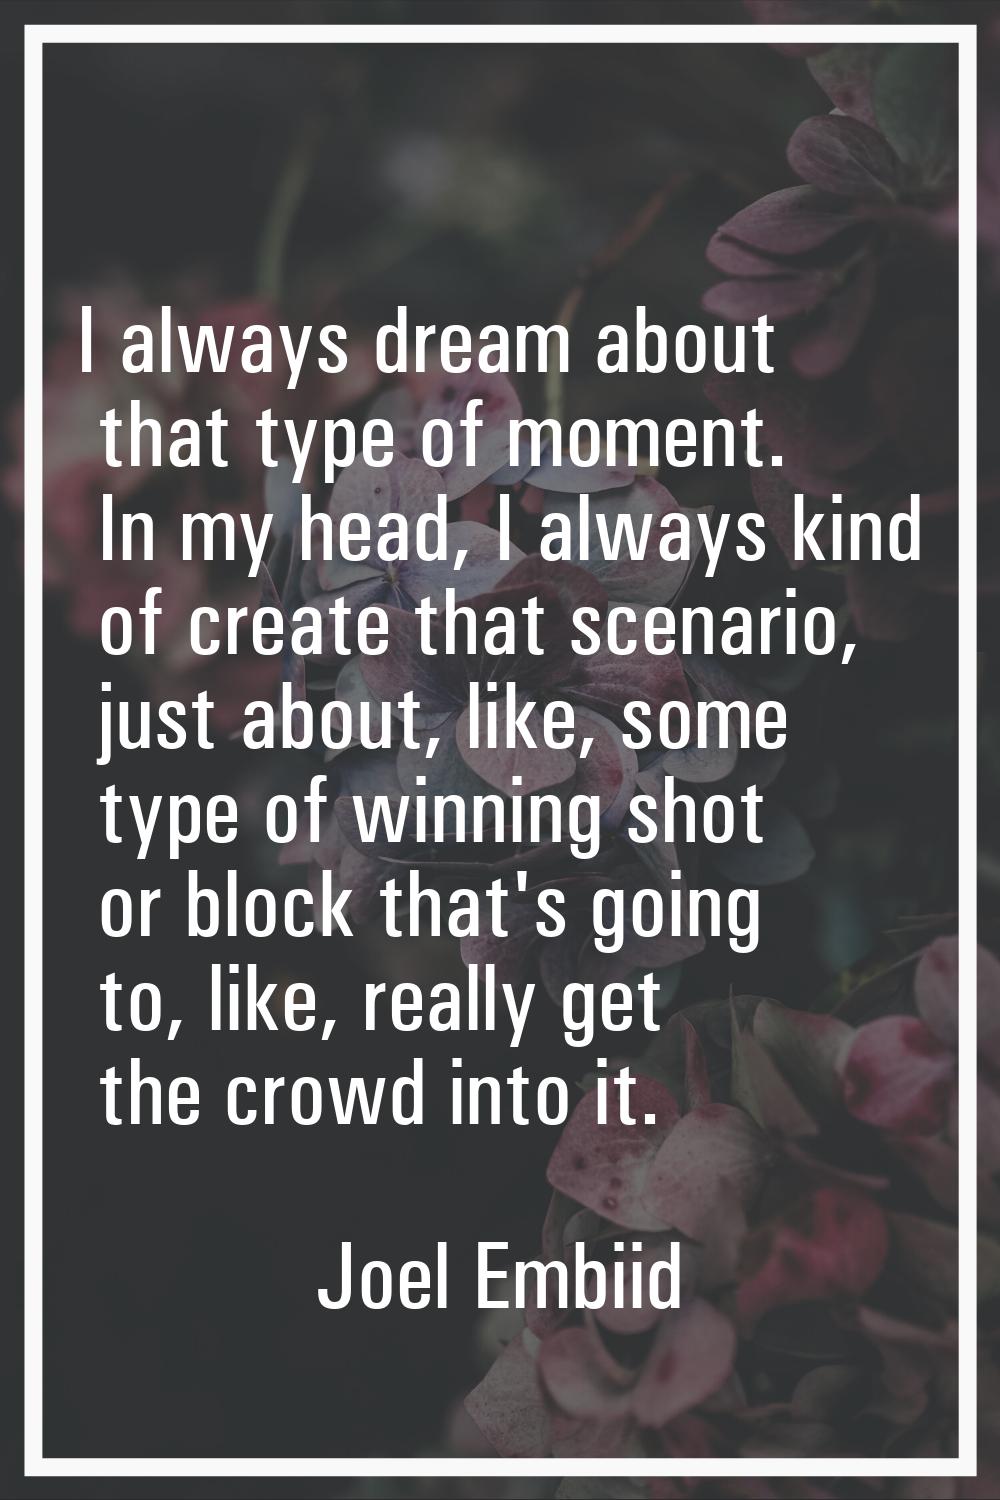 I always dream about that type of moment. In my head, I always kind of create that scenario, just a